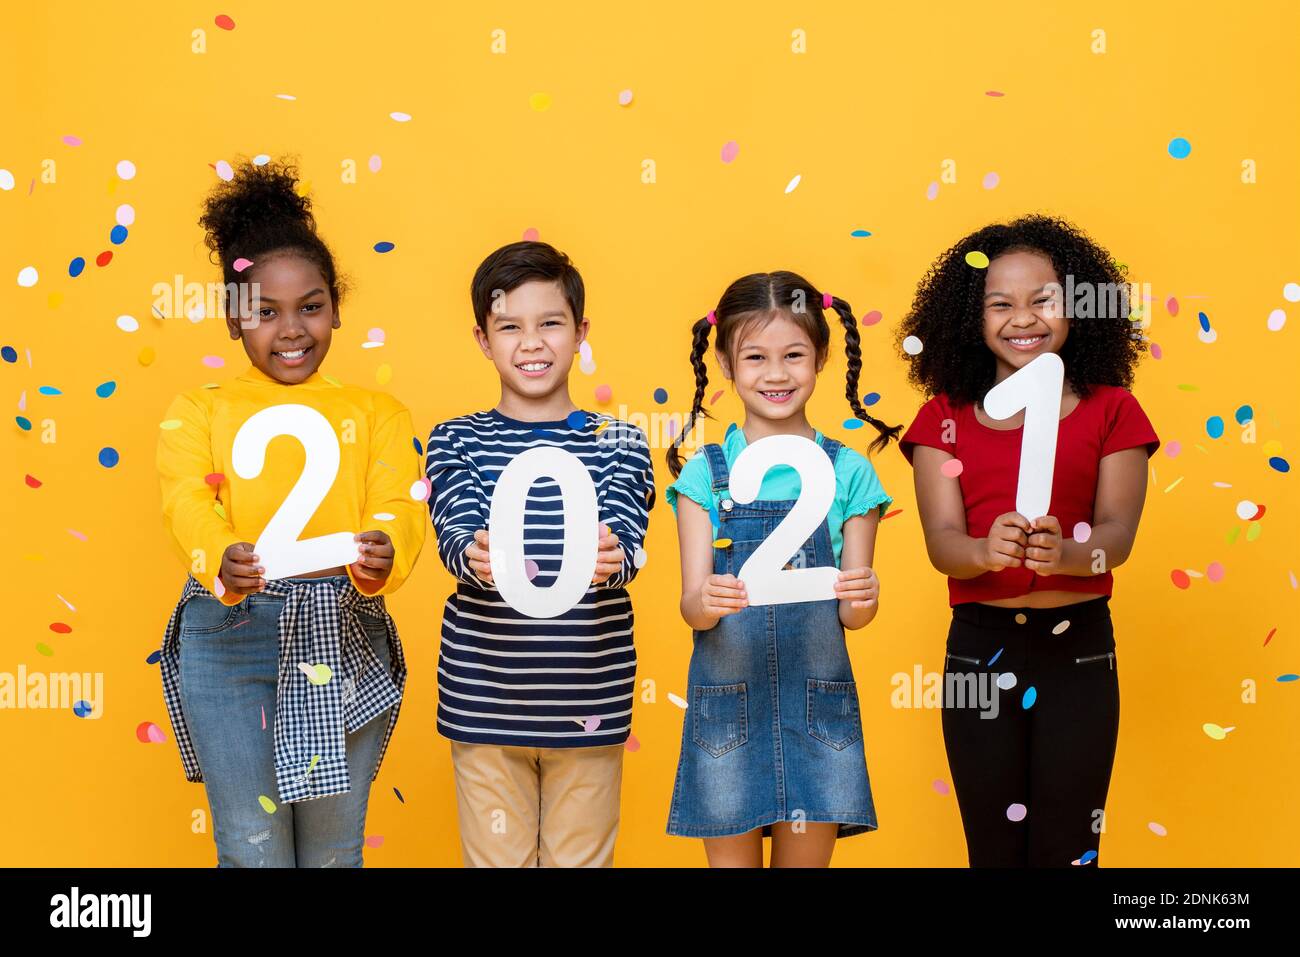 Cute smiling diverse kids showing numbers 2021 celebrating new year isolated on yellow background Stock Photo